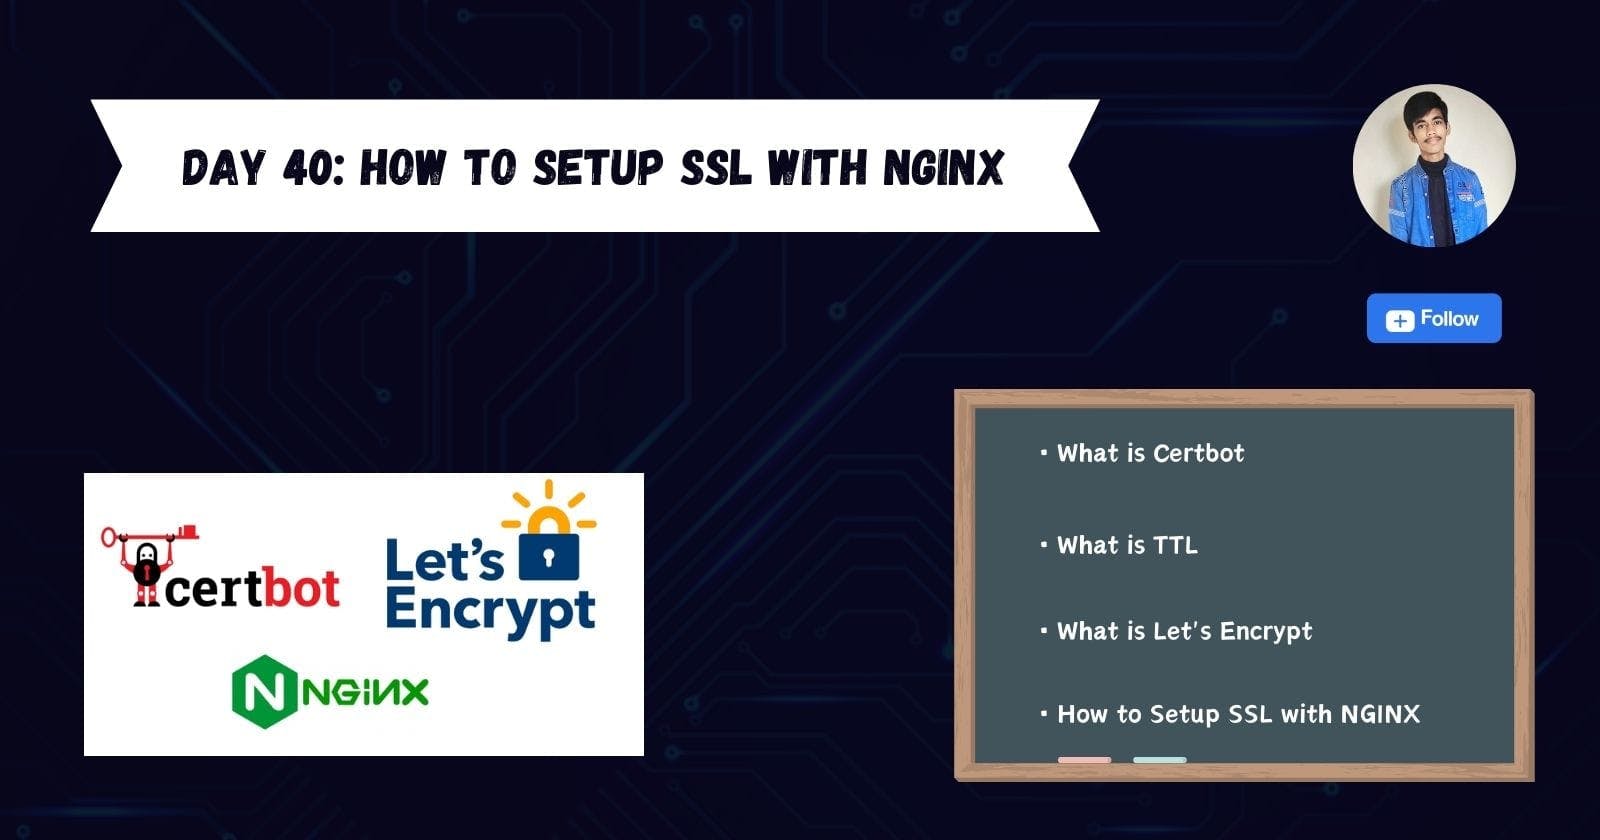 Day 40: How to setup SSL with NGINX